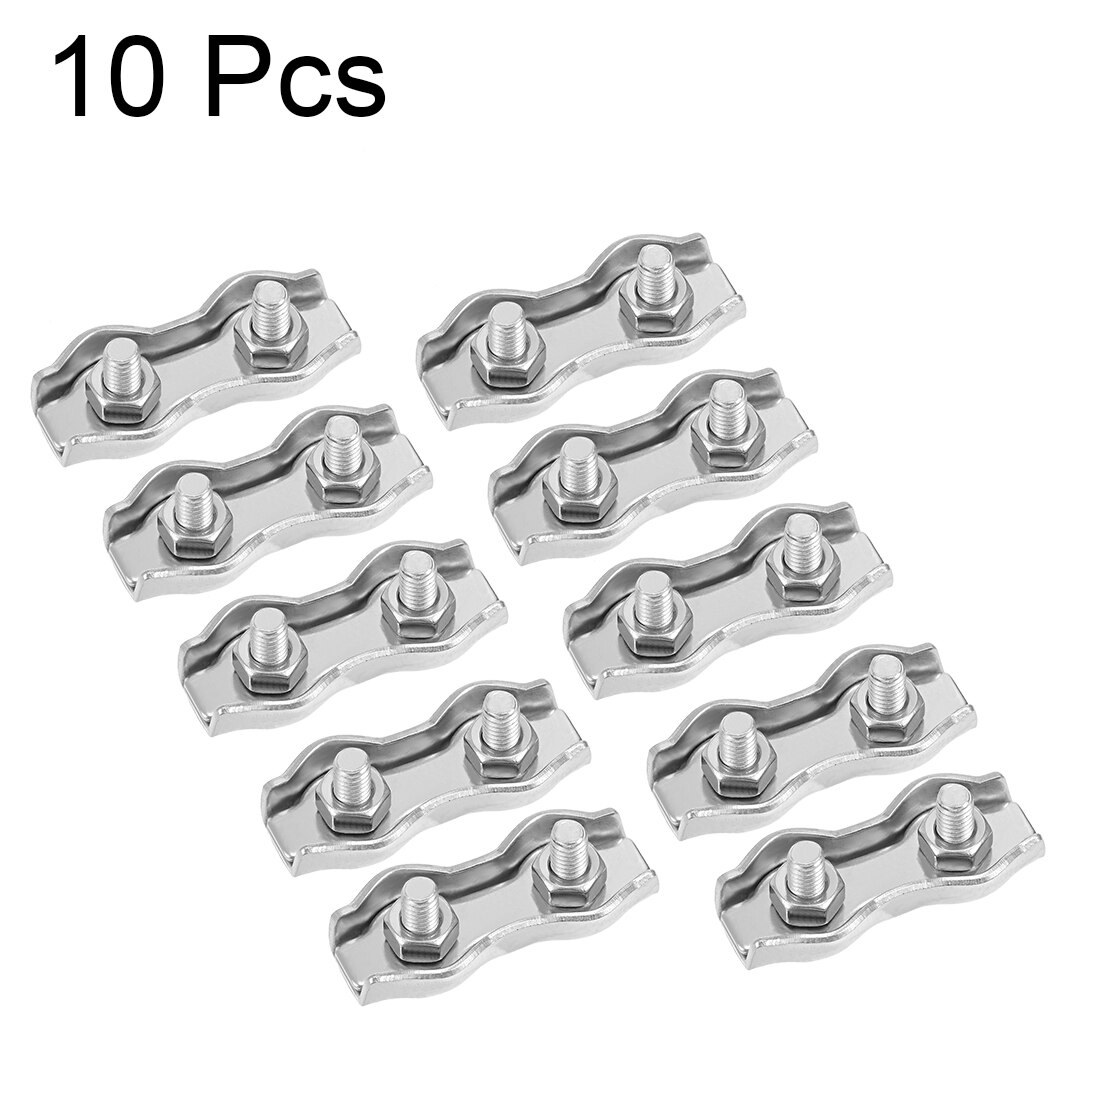 uxcell Stainless Steel Duplex Wire Rope Clip Cable Clamp Suit for 1.5-2mm -10pcs